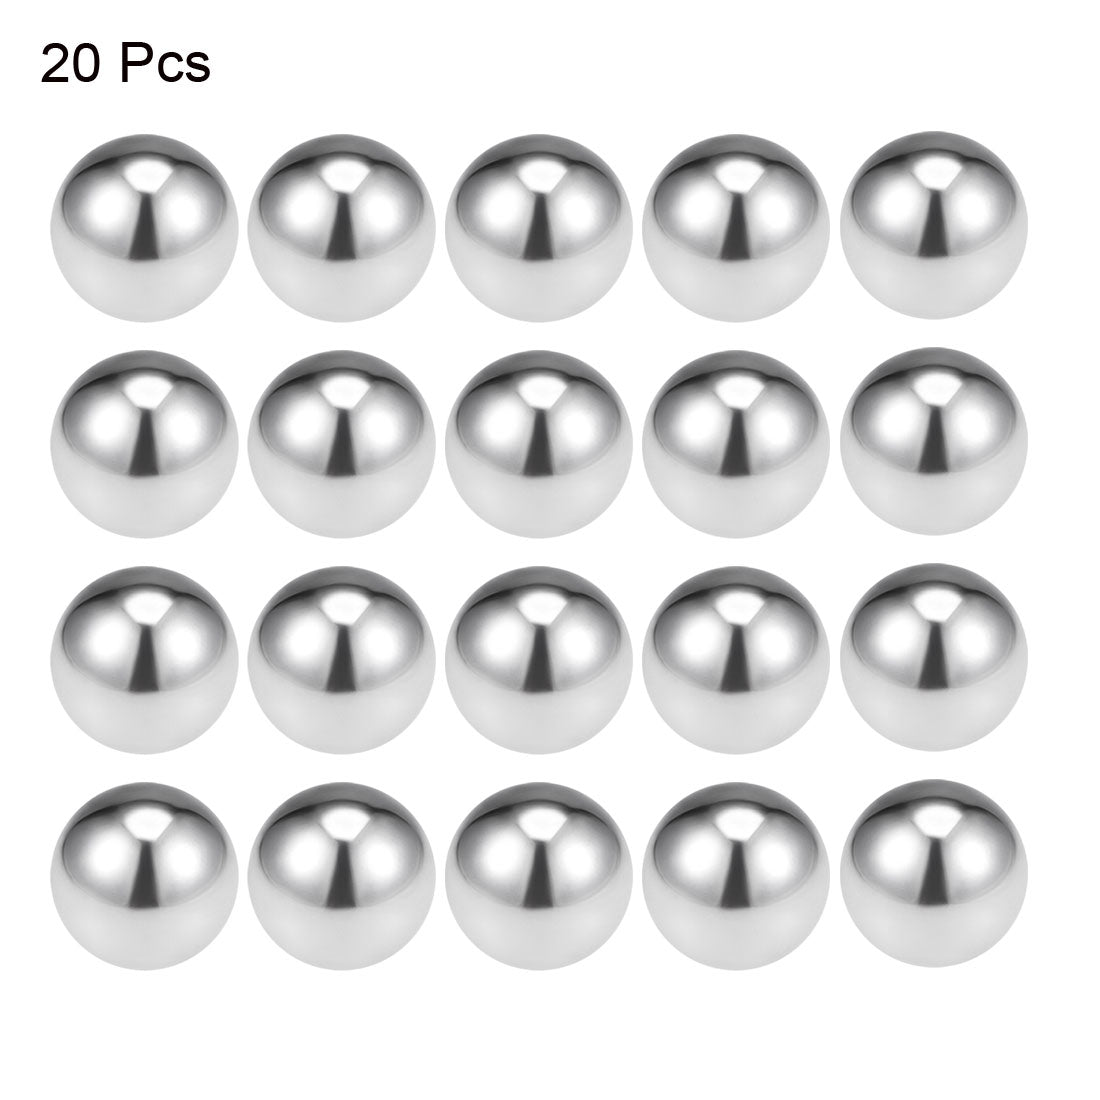 Uxcell Uxcell 1/4" Bearing Balls 316L Stainless Steel G100 Precision Balls 50pcs